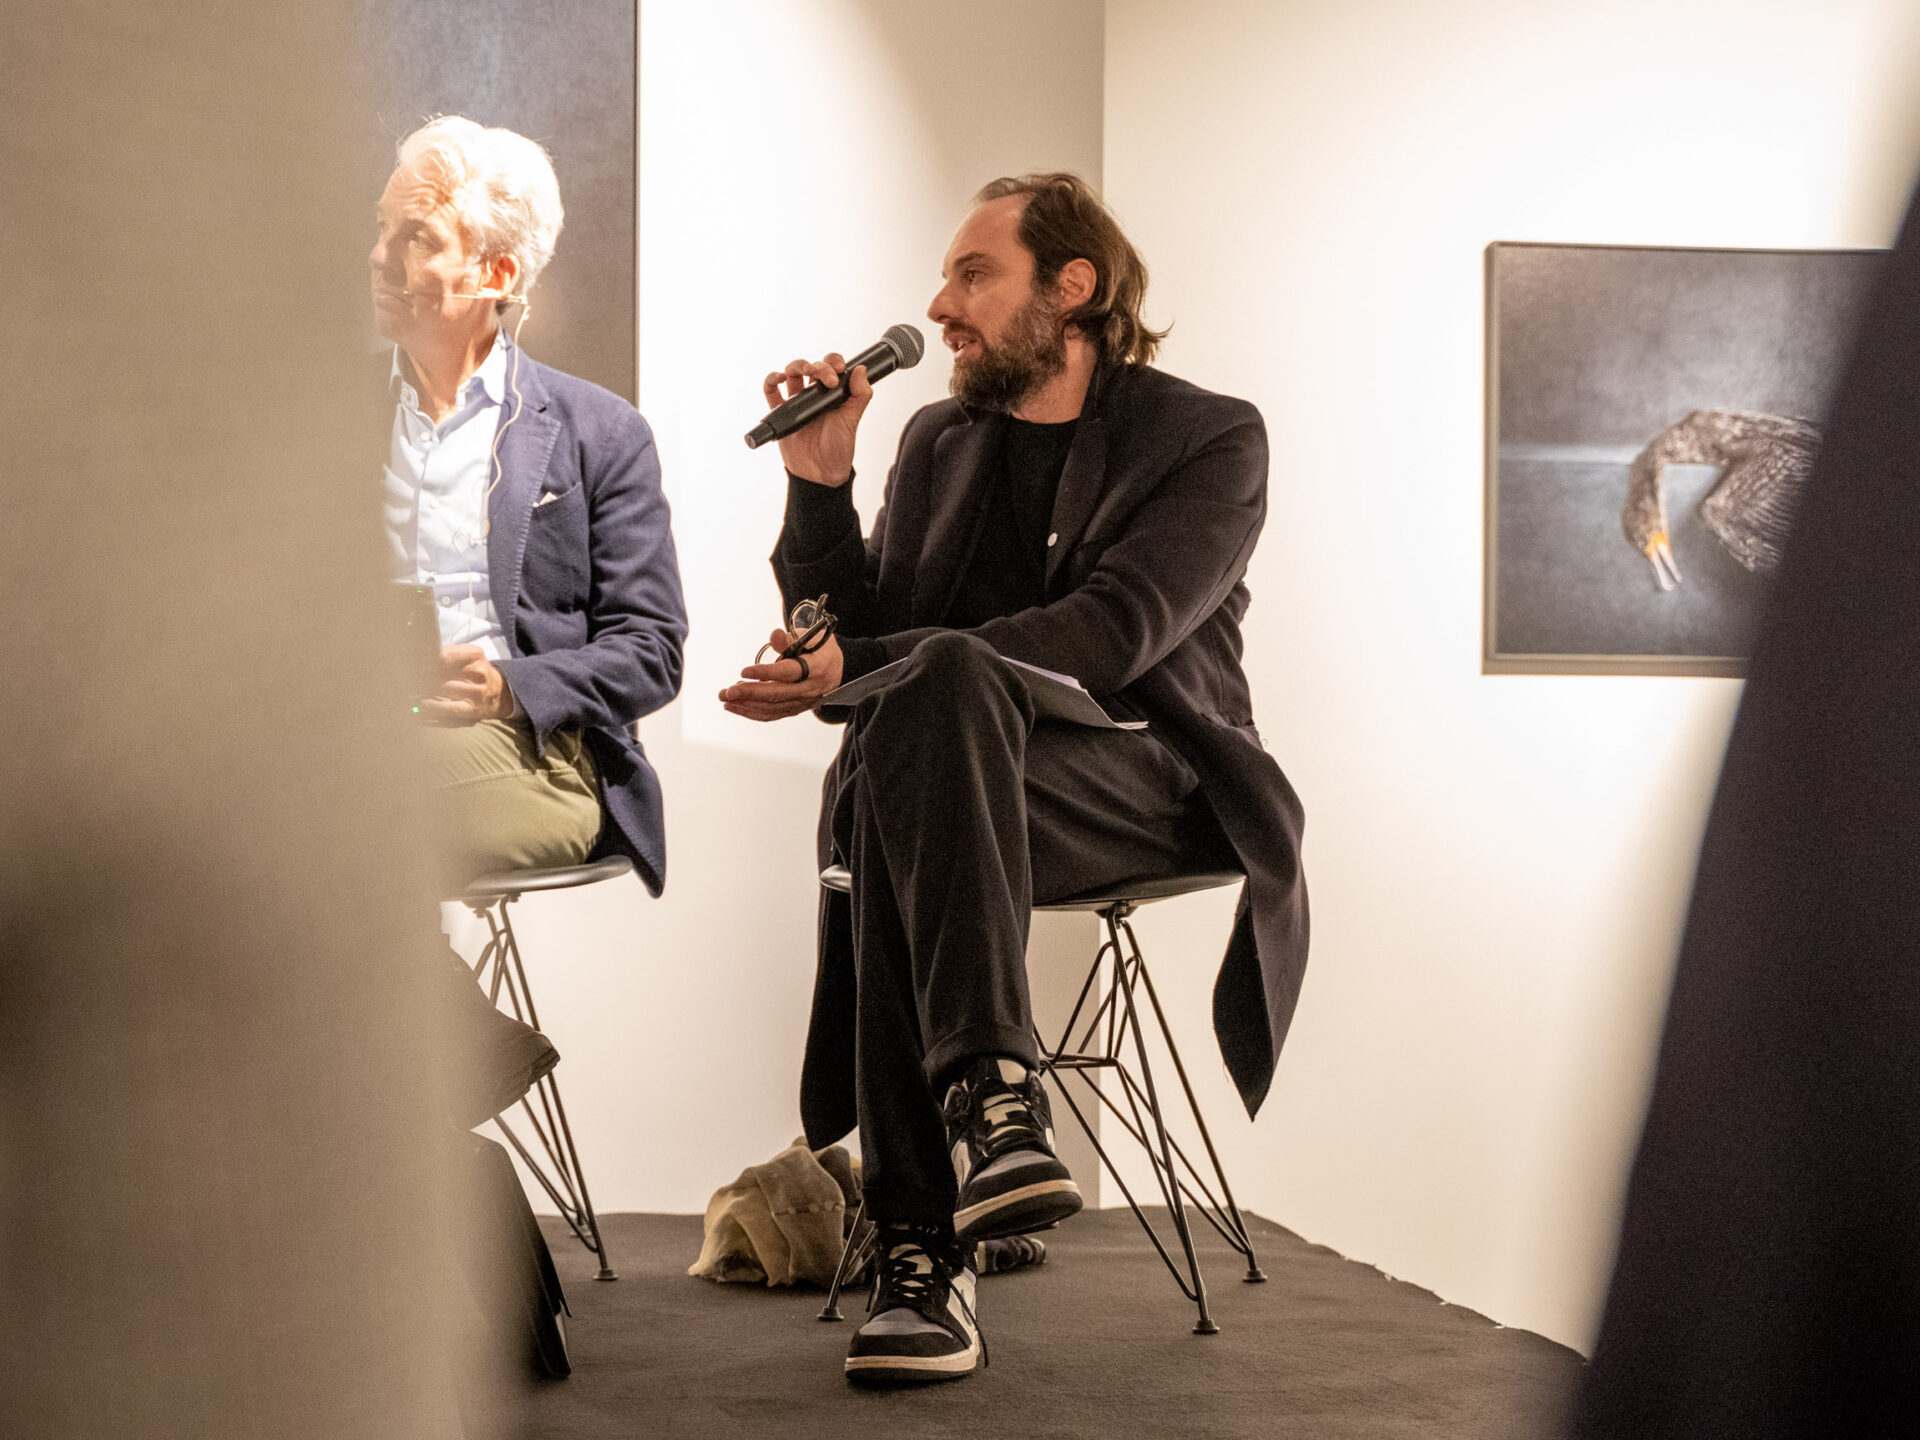 Belgium Sothebys Int. Realty Panel discussion on photography – FR